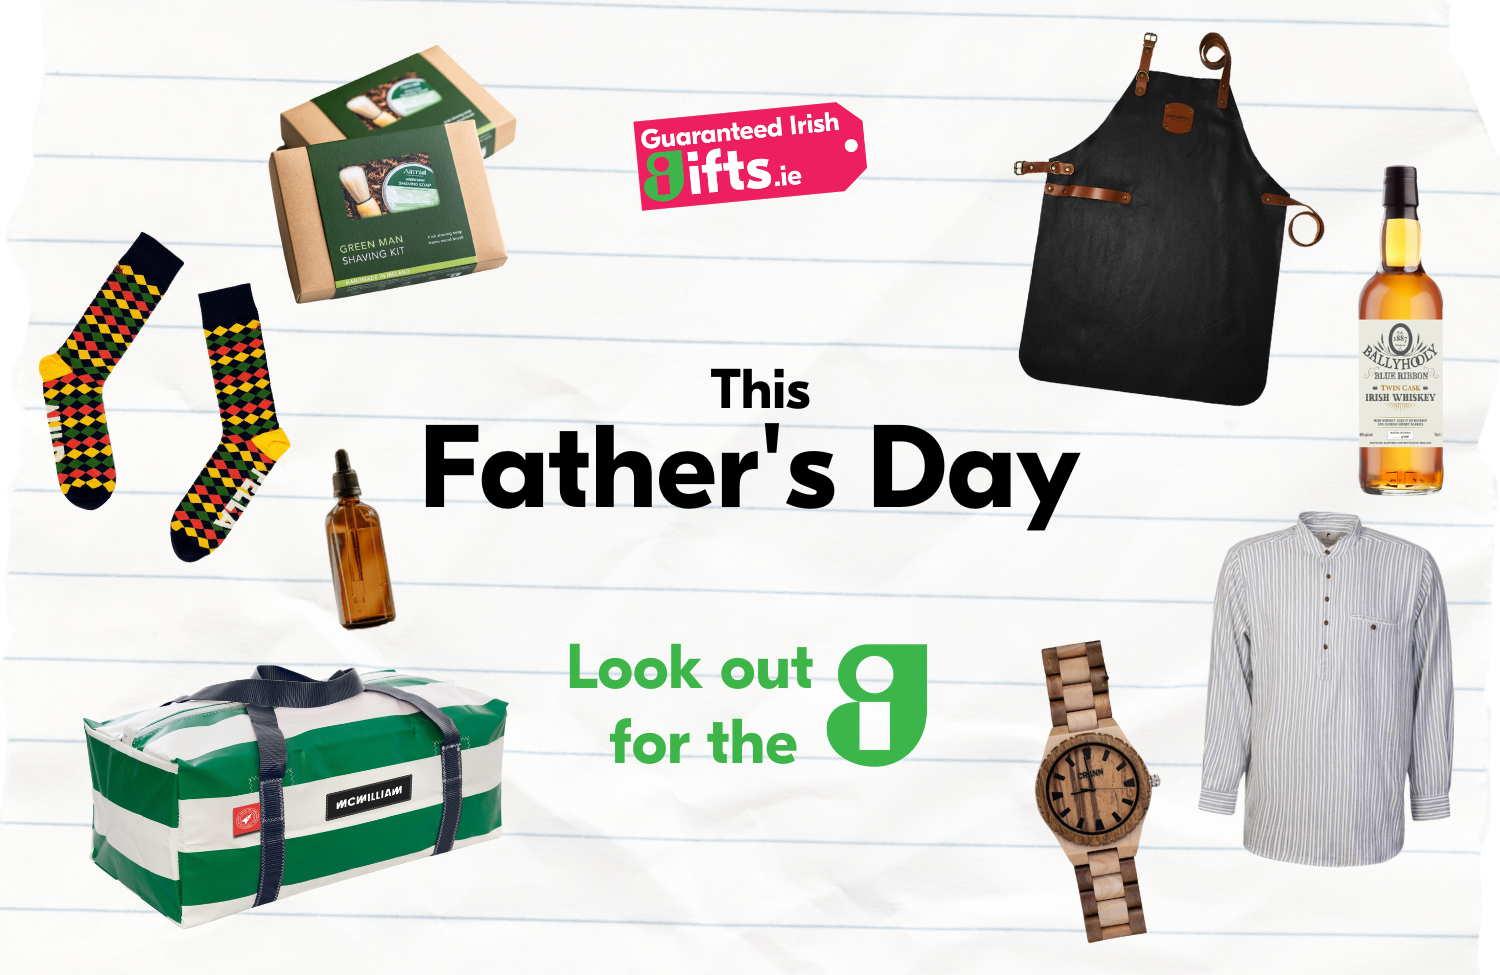 Guaranteed Irish Gifts for Discerning Dads this Father's Day